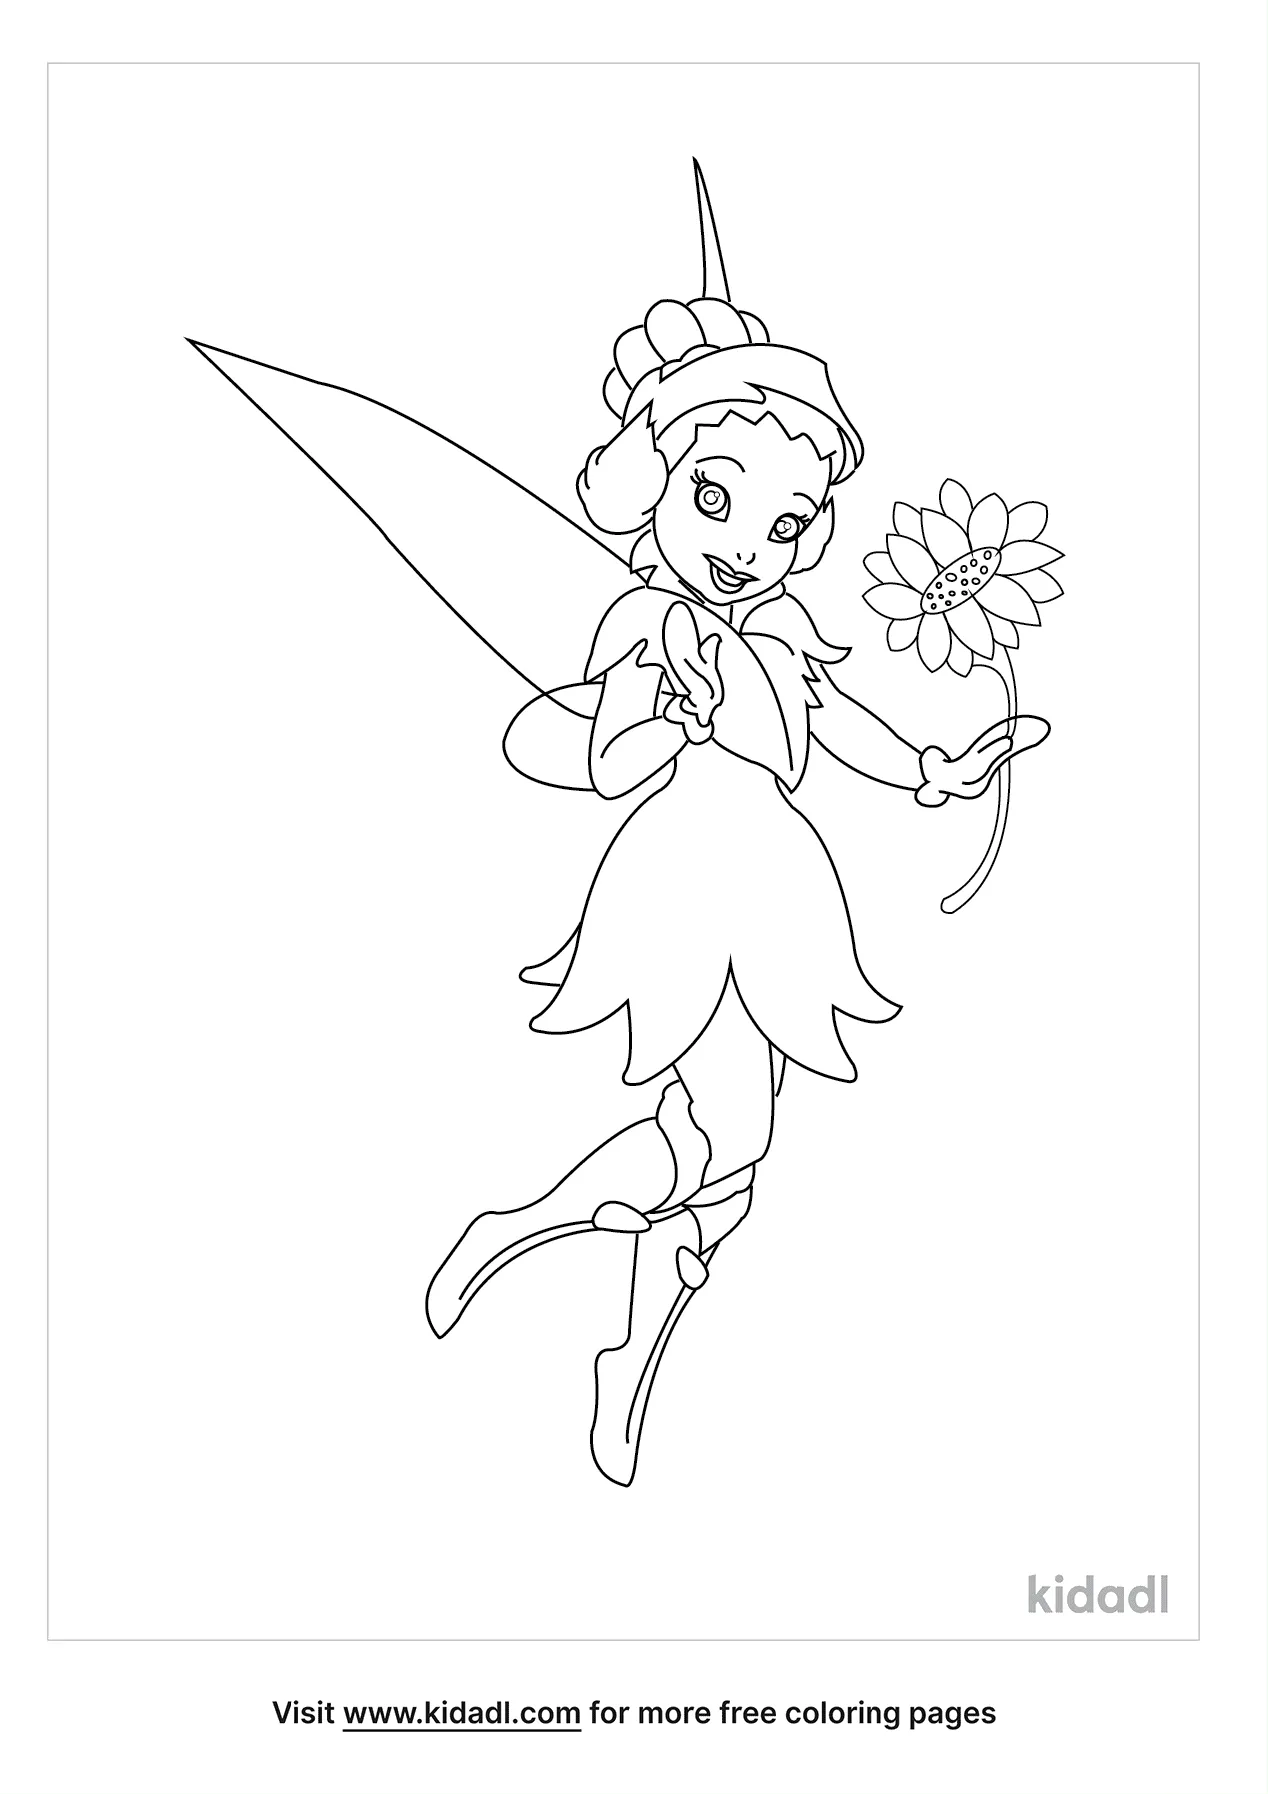 Fairies Coloring Pages | Coloring Pages | Kidadl